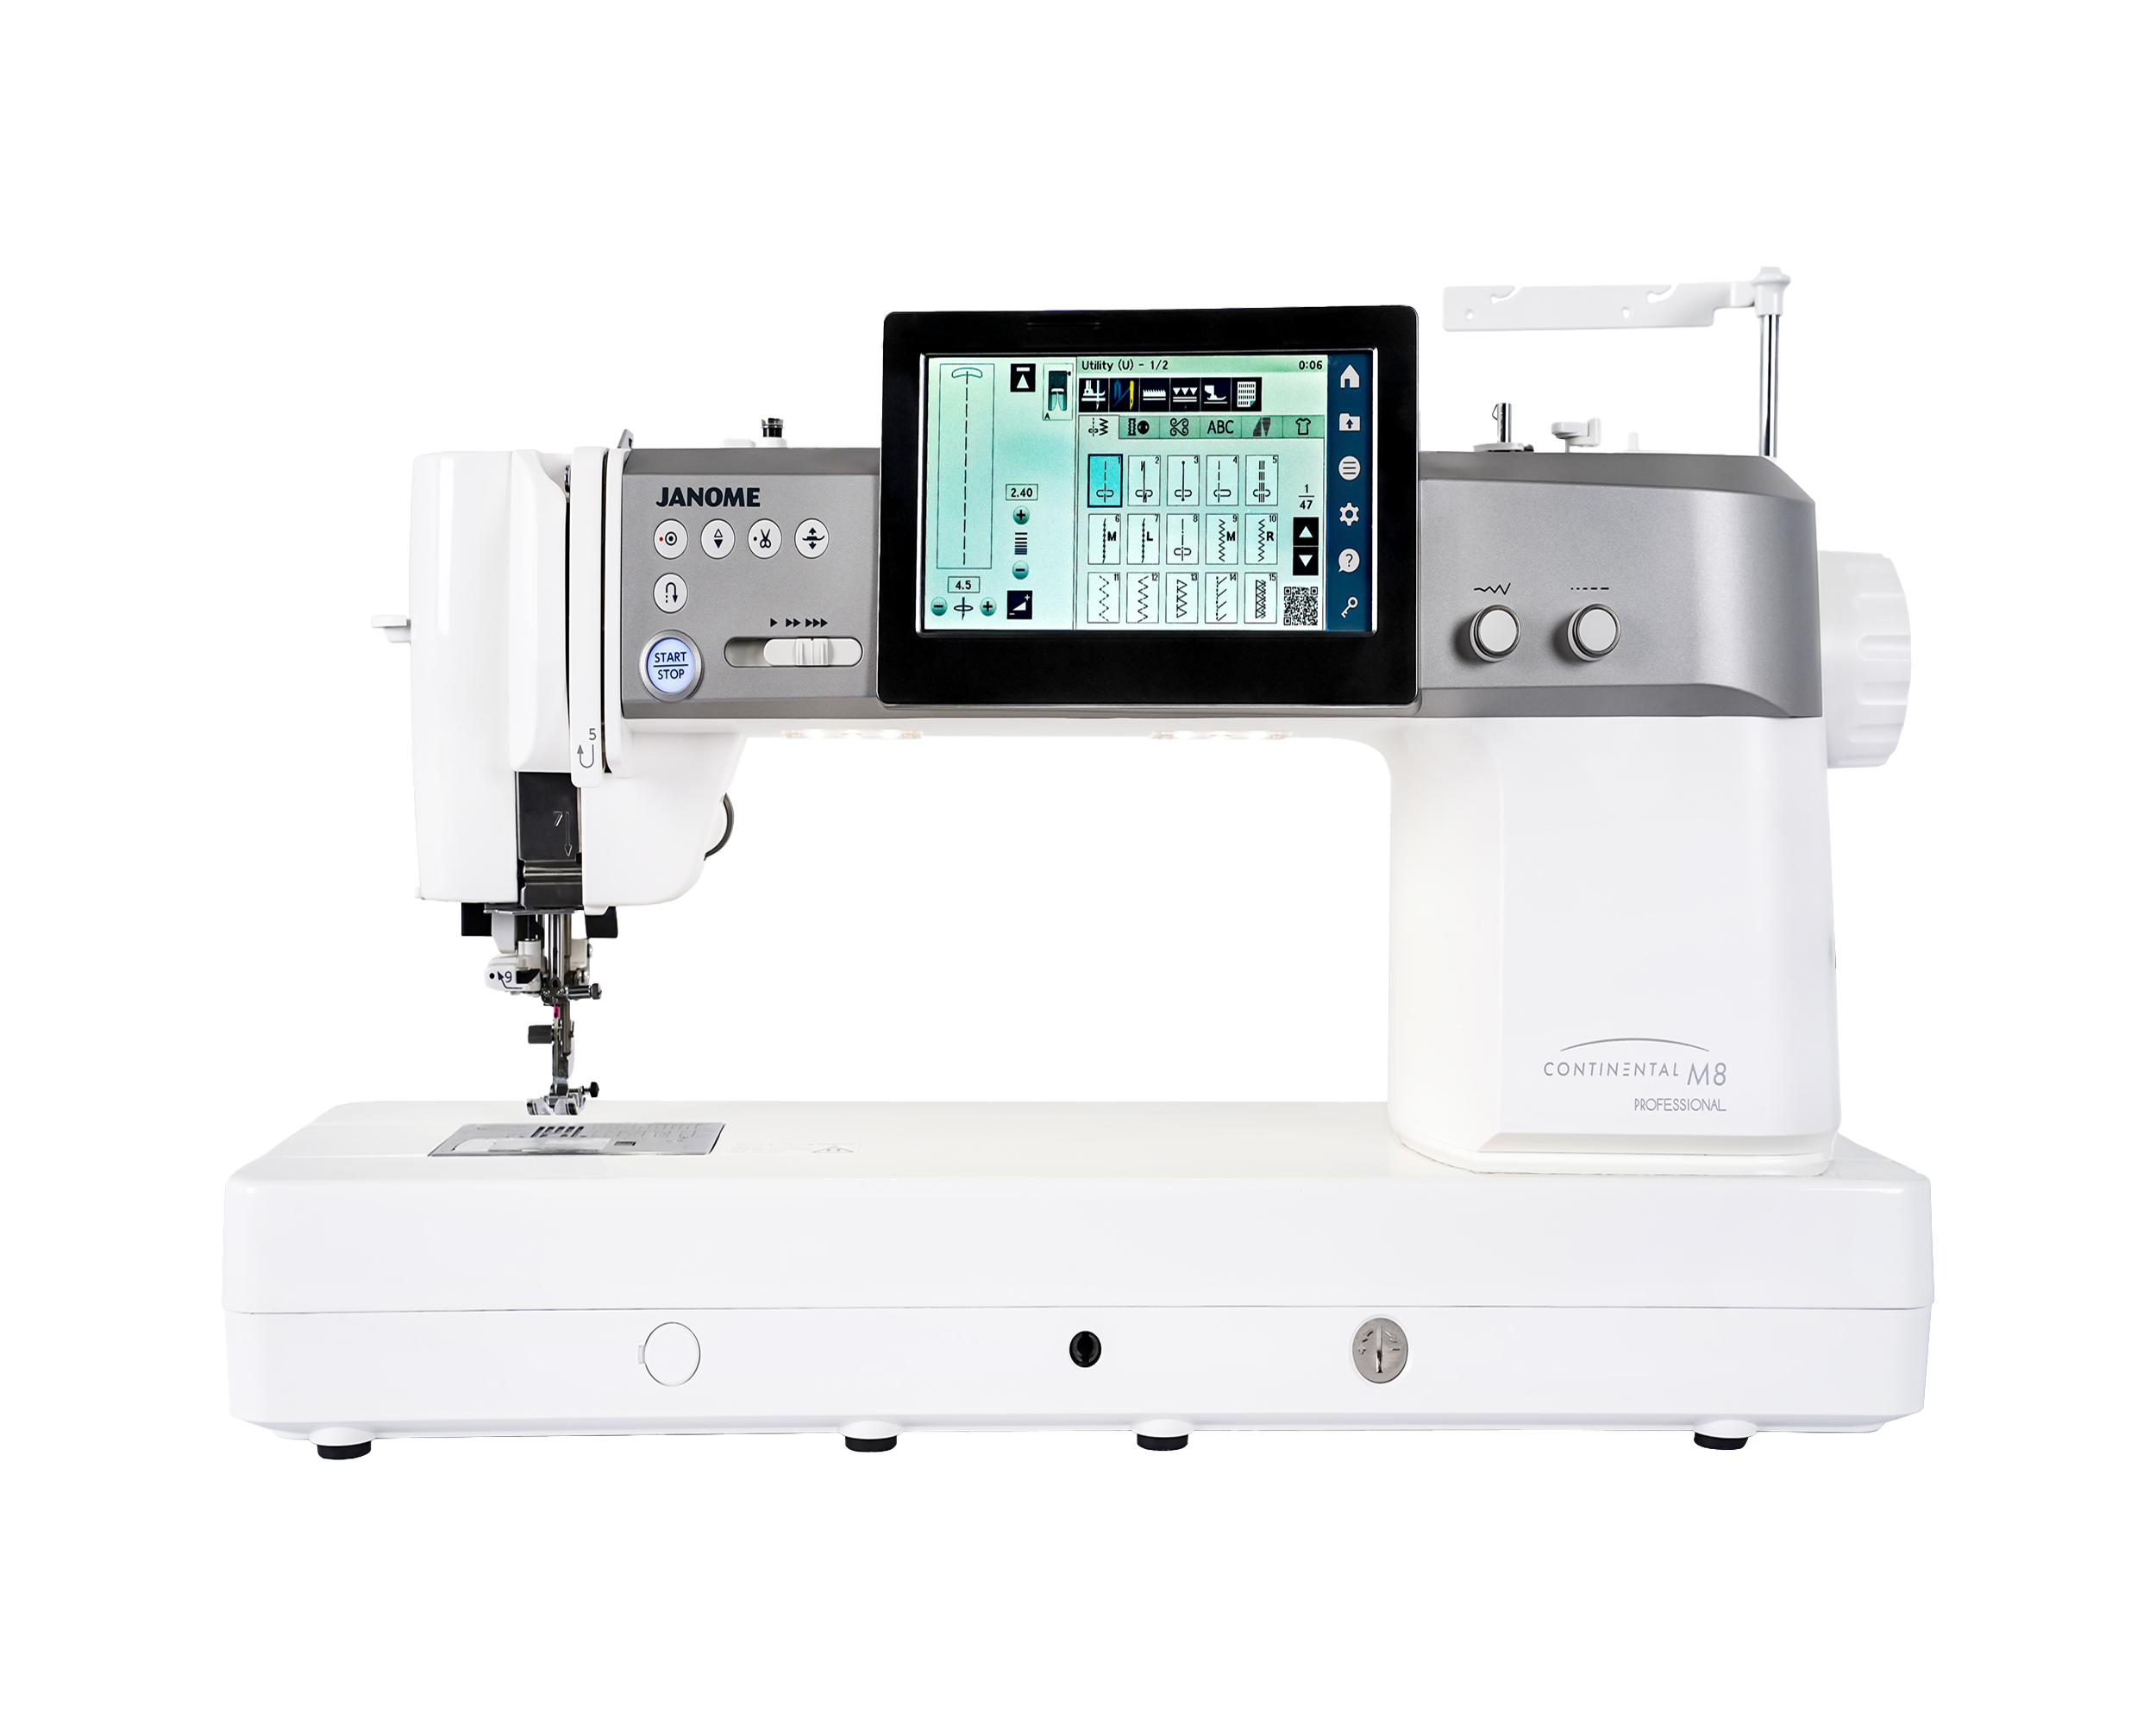 Janome Continental M8 Professional Sewing Machine for Sale at World Weidner